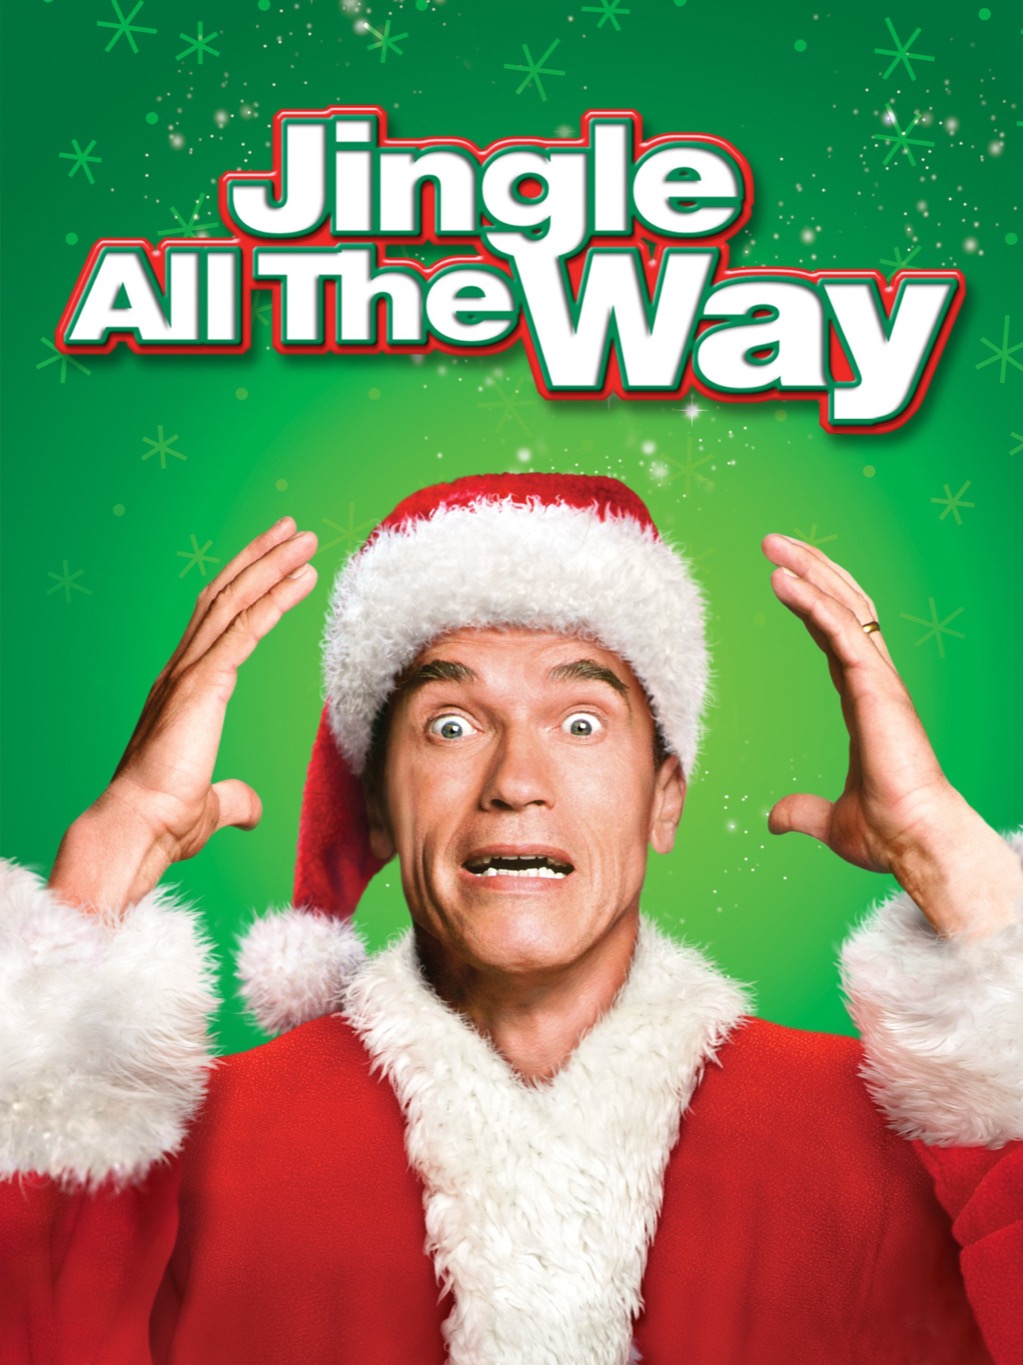 jingle all the way is a bad xmas movie